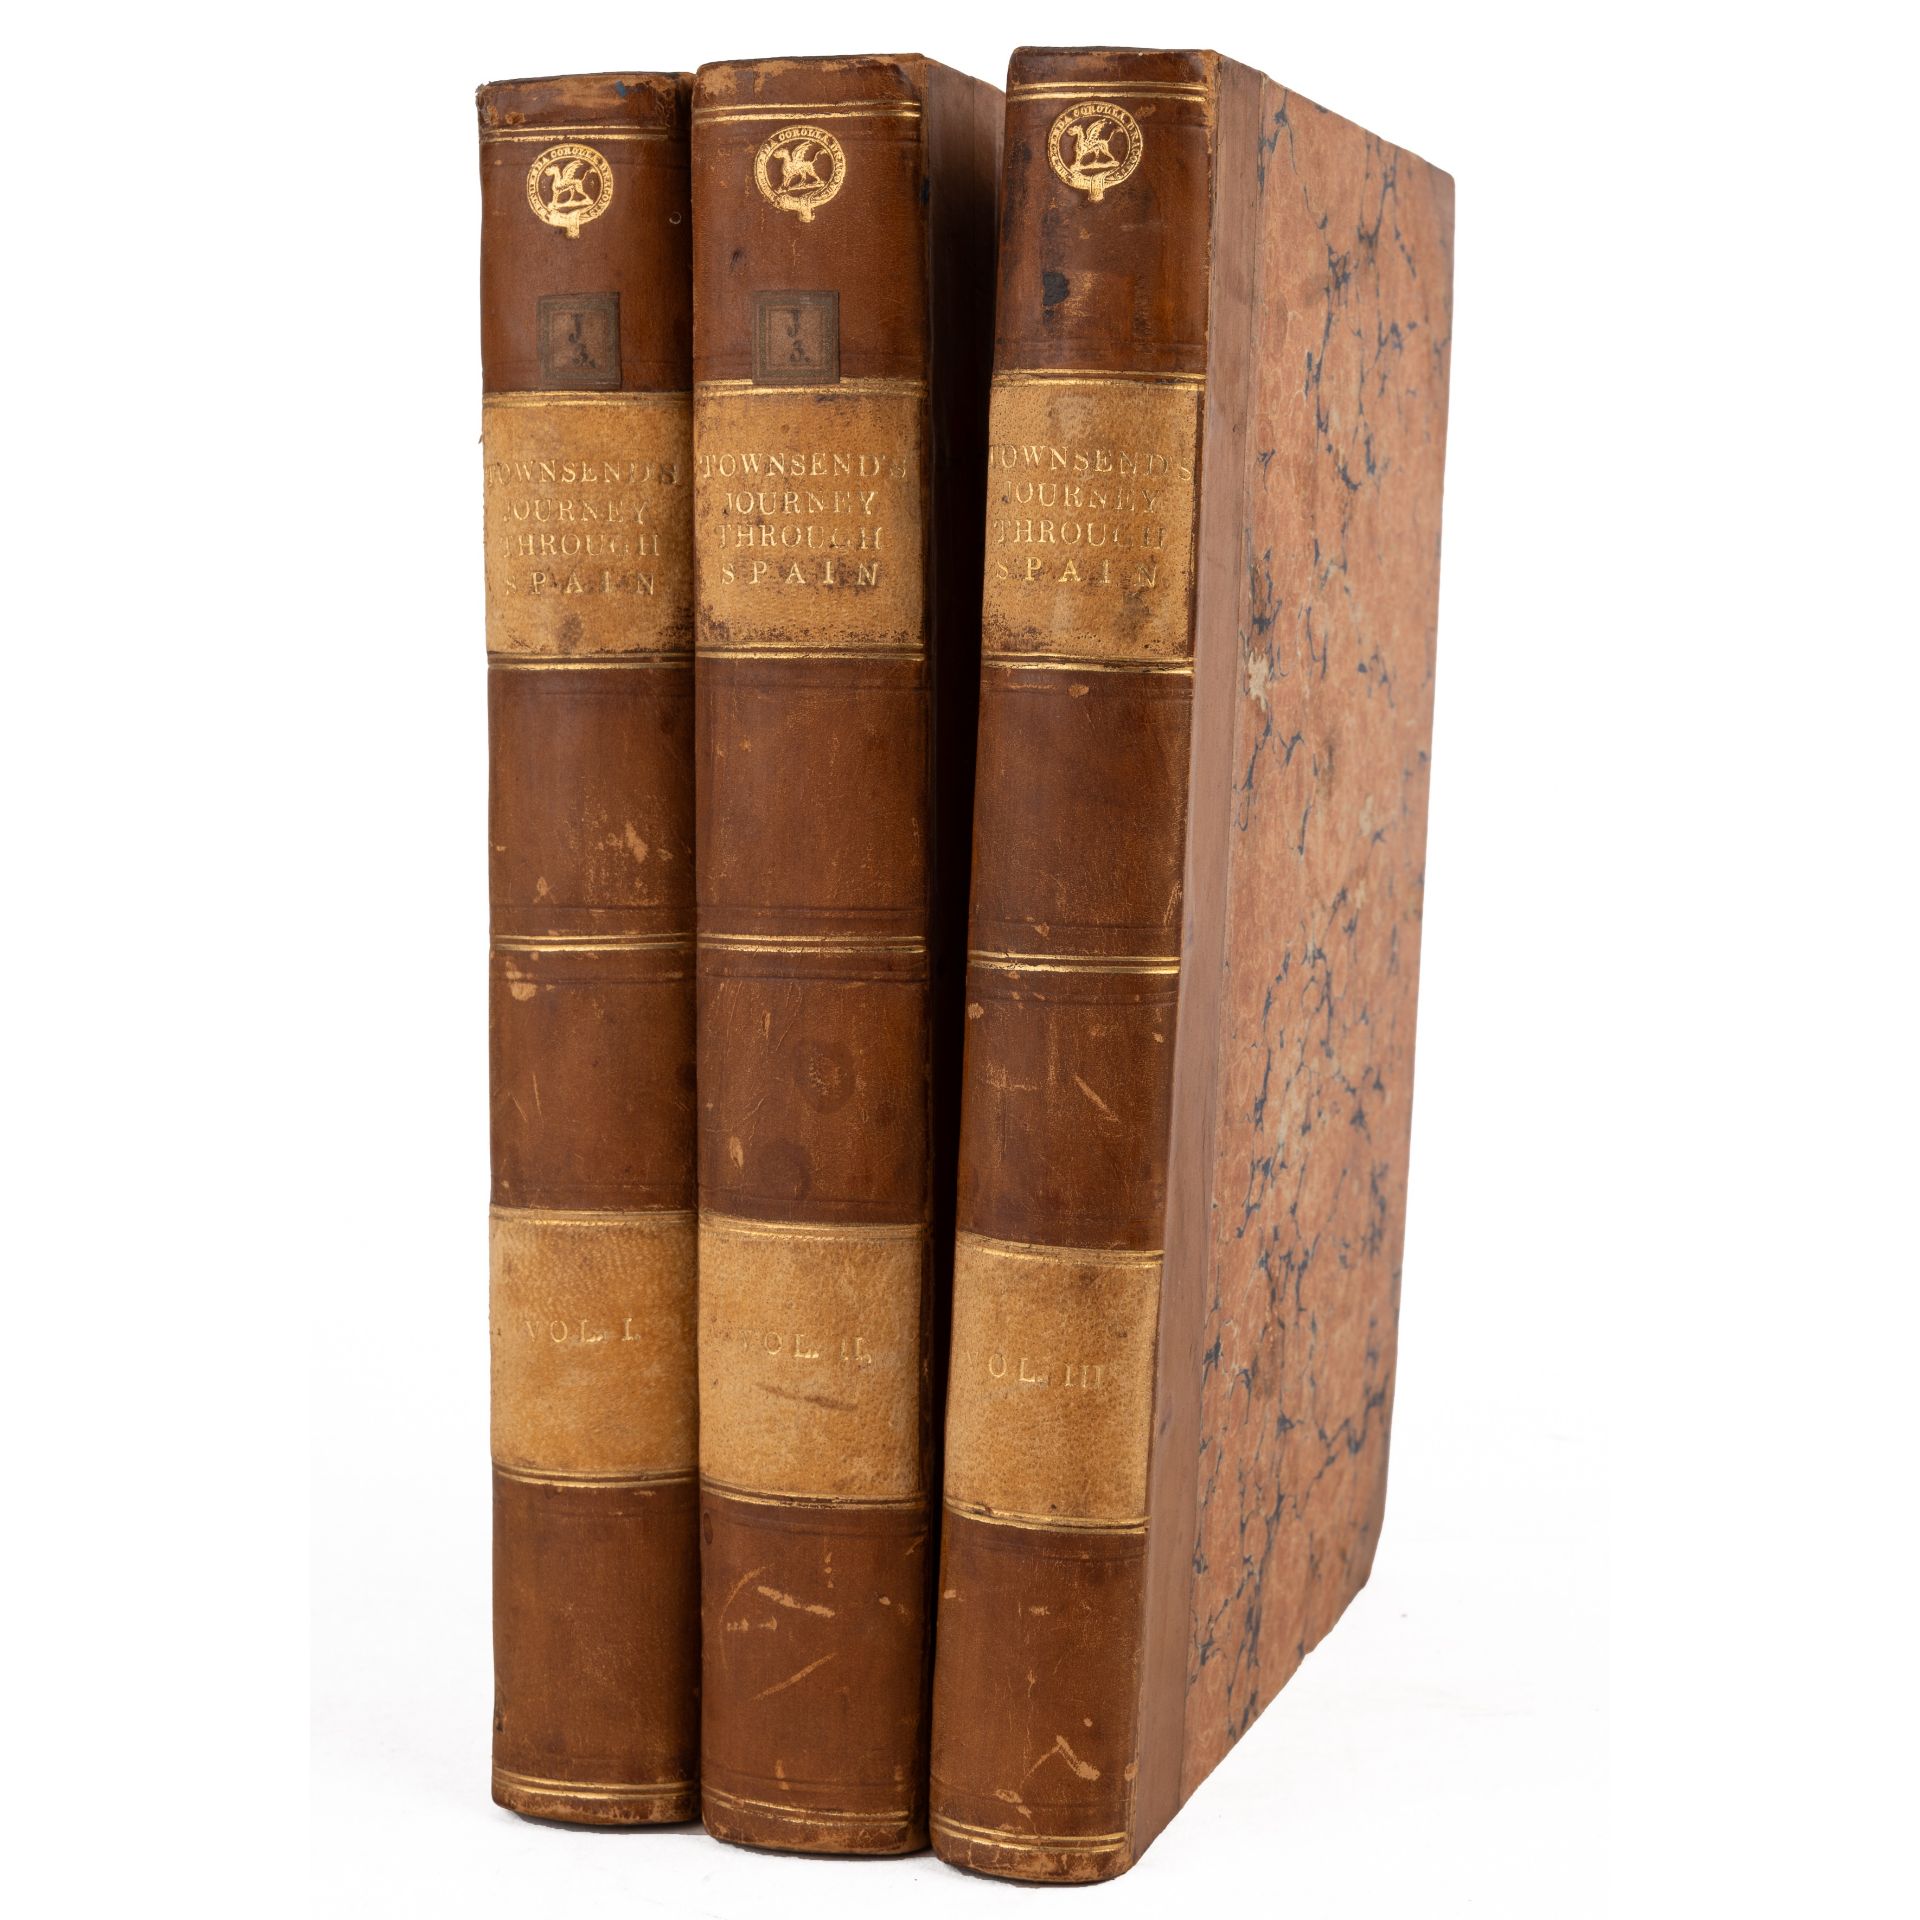 Townsend (Joseph). 'A Journey through Spain in the Years 1786 and 1787...'. 3 vols. 8vo. C Dilly,